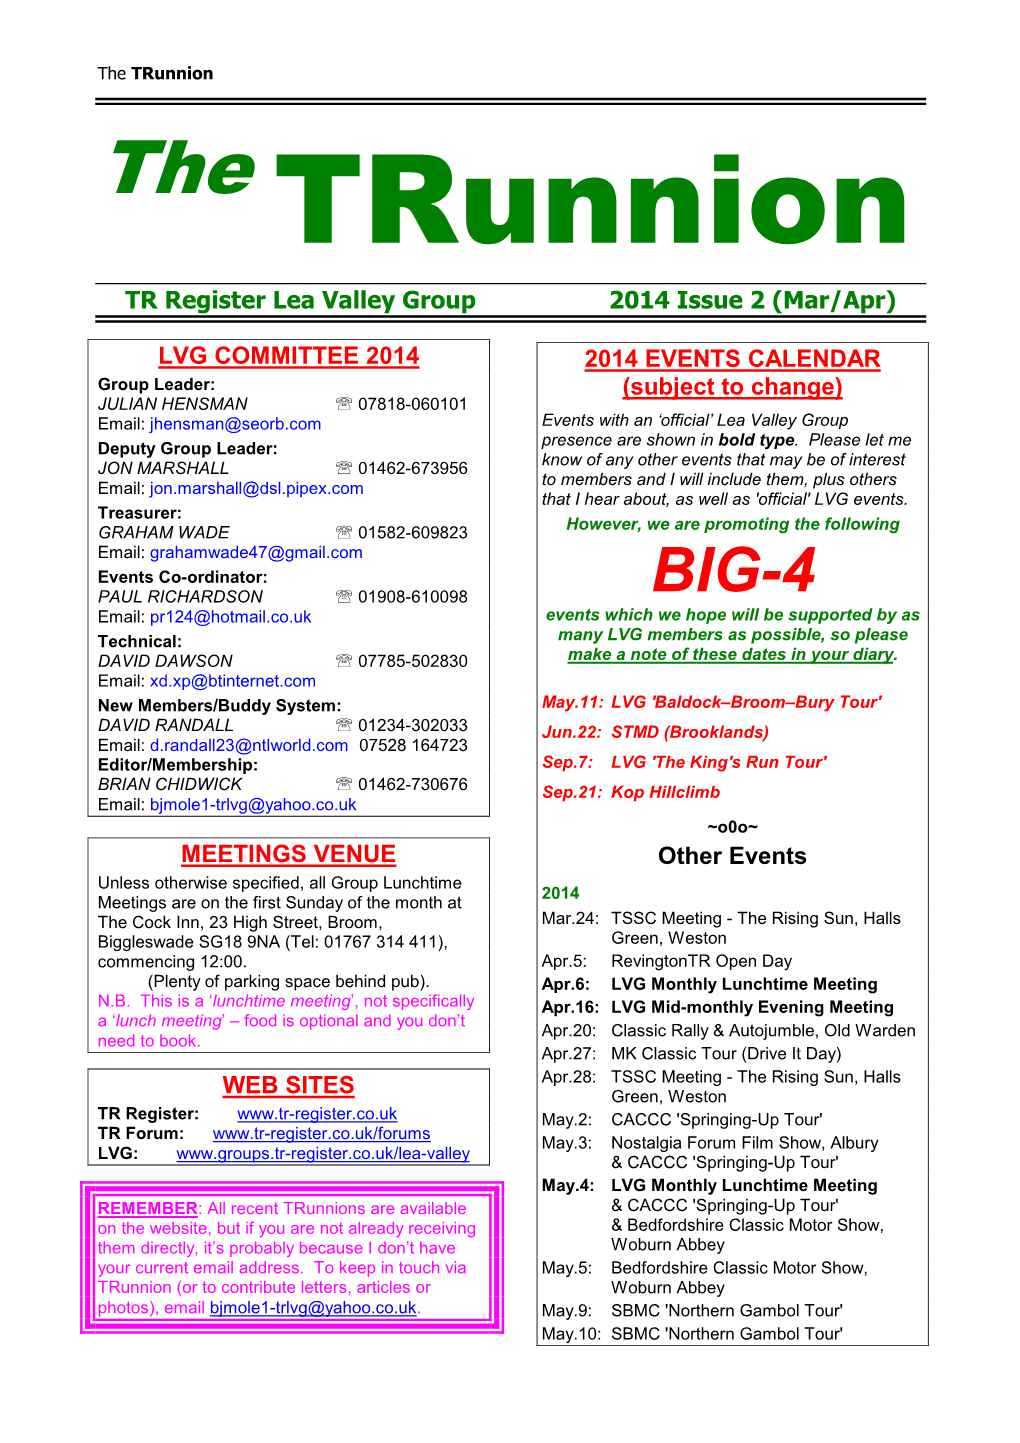 The Trunnion the Trunnion TR Register Lea Valley Group 2014 Issue 2 (Mar/Apr)